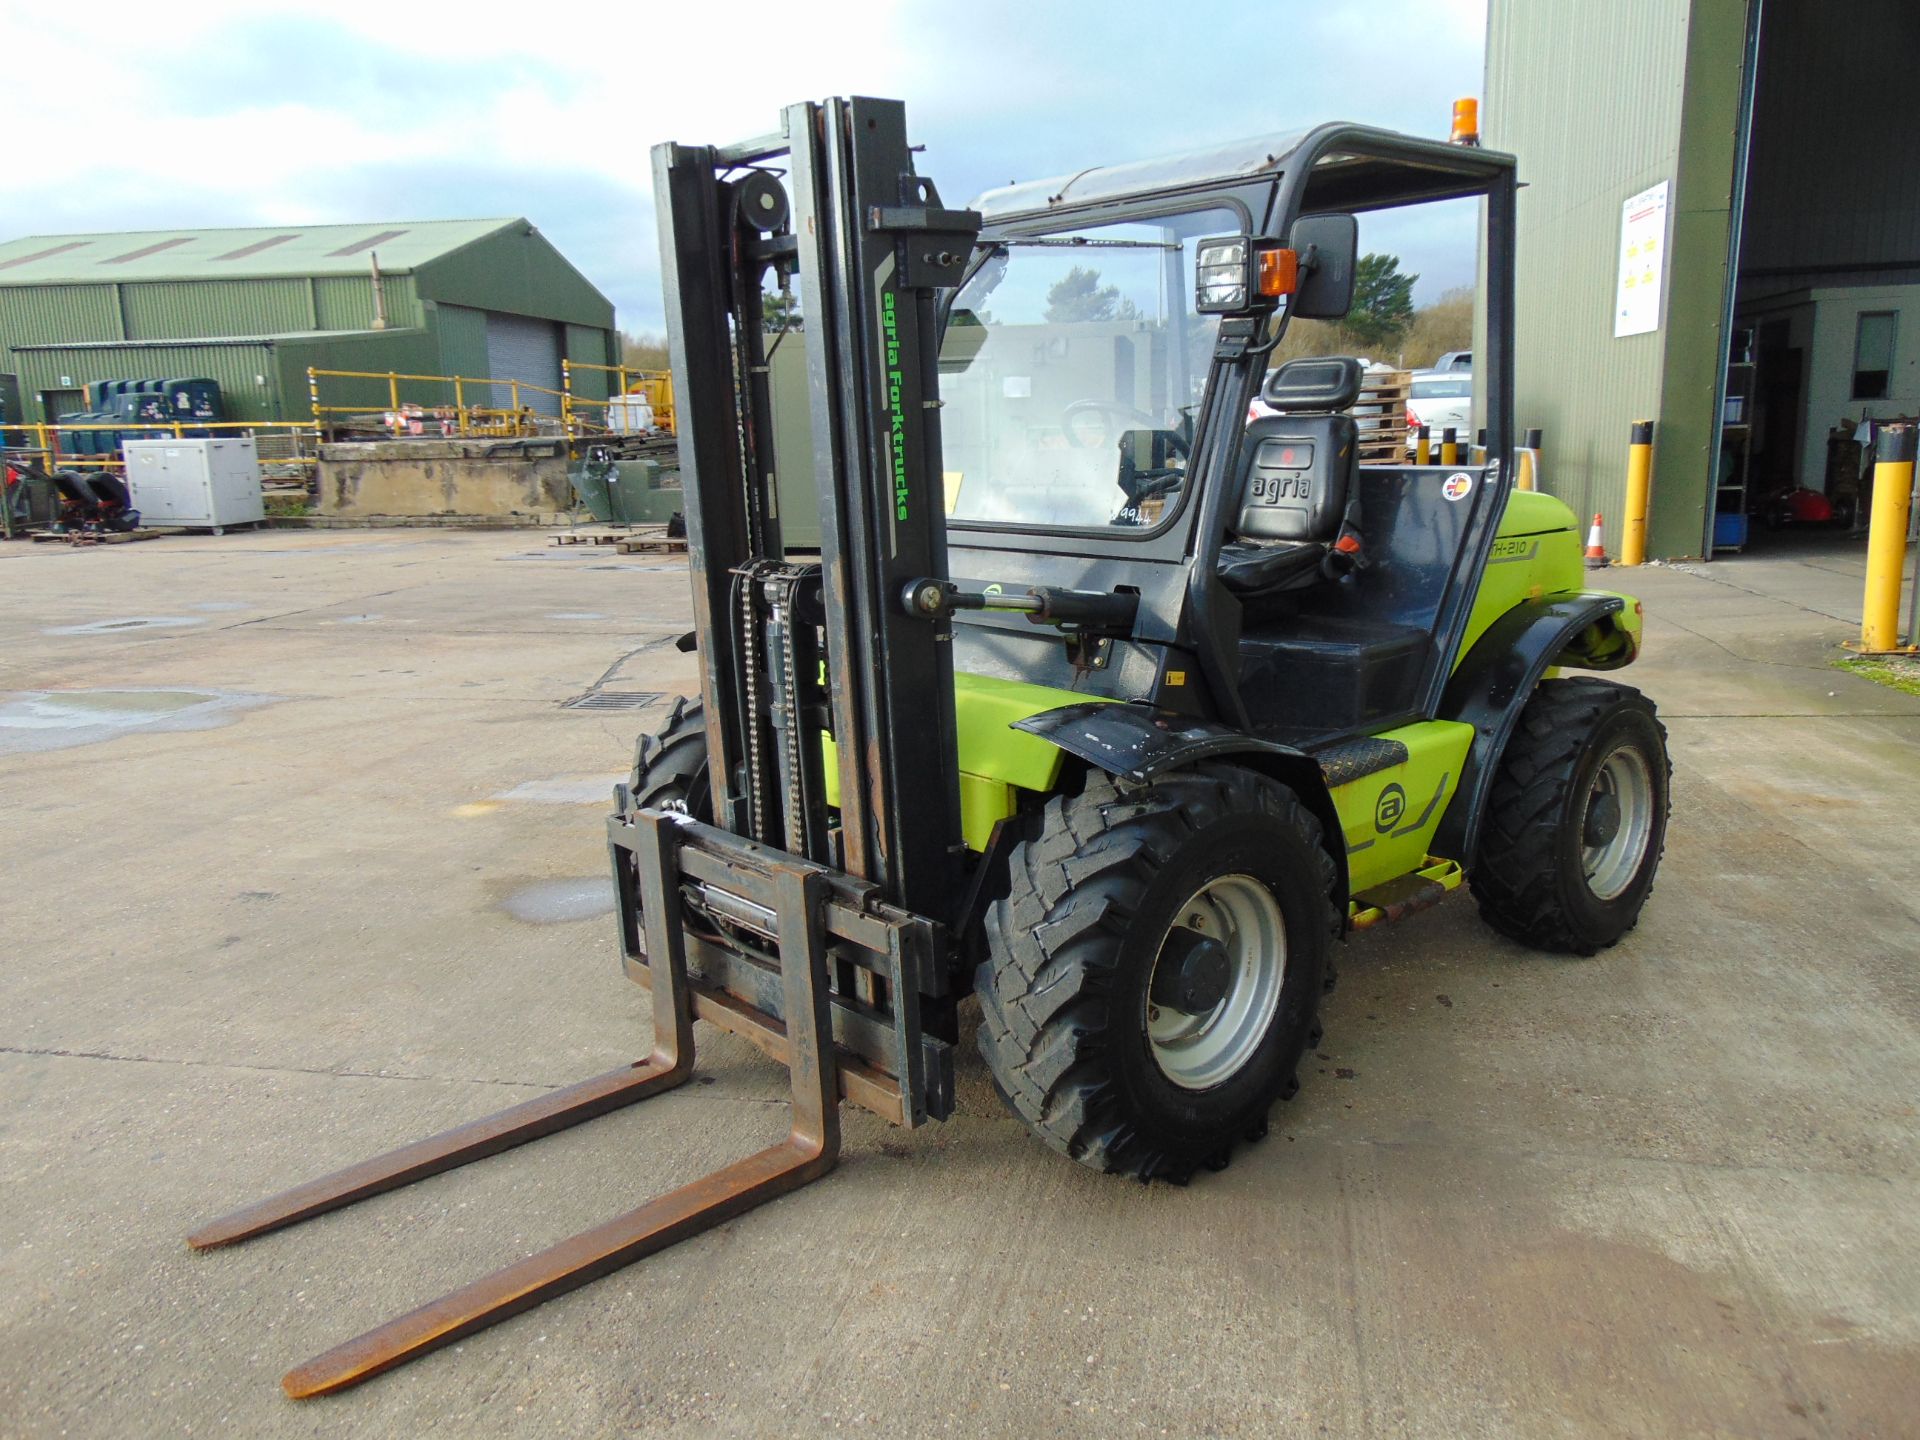 2011 Agrimac Agria TH210 4x4 Rough Terrain Diesel Forklift ONLY 1,918 HOURS!!! - Image 4 of 30